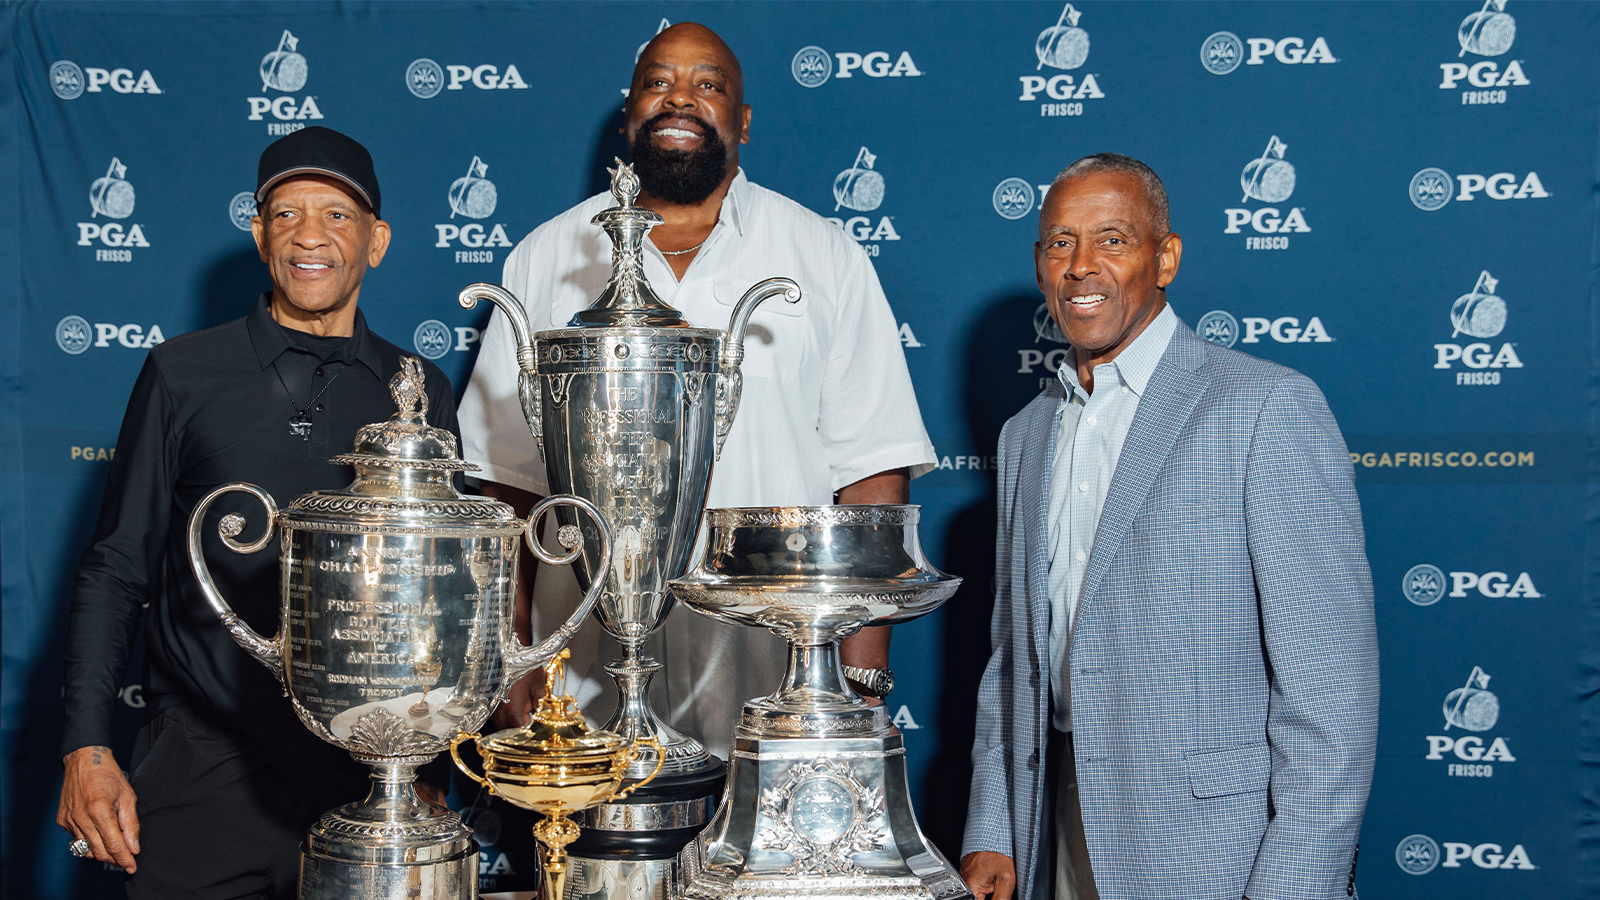 Former Dallas Cowboy Players, Drew Pearson, Ed “Too Tall” Jones & Tony Dorsett pose with the trophies during the Welcome Home Celebration at PGA Frisco Campus on August 22, 2022 in Frisco, Texas. (Photo by Daryl Johnson/PGA of America)